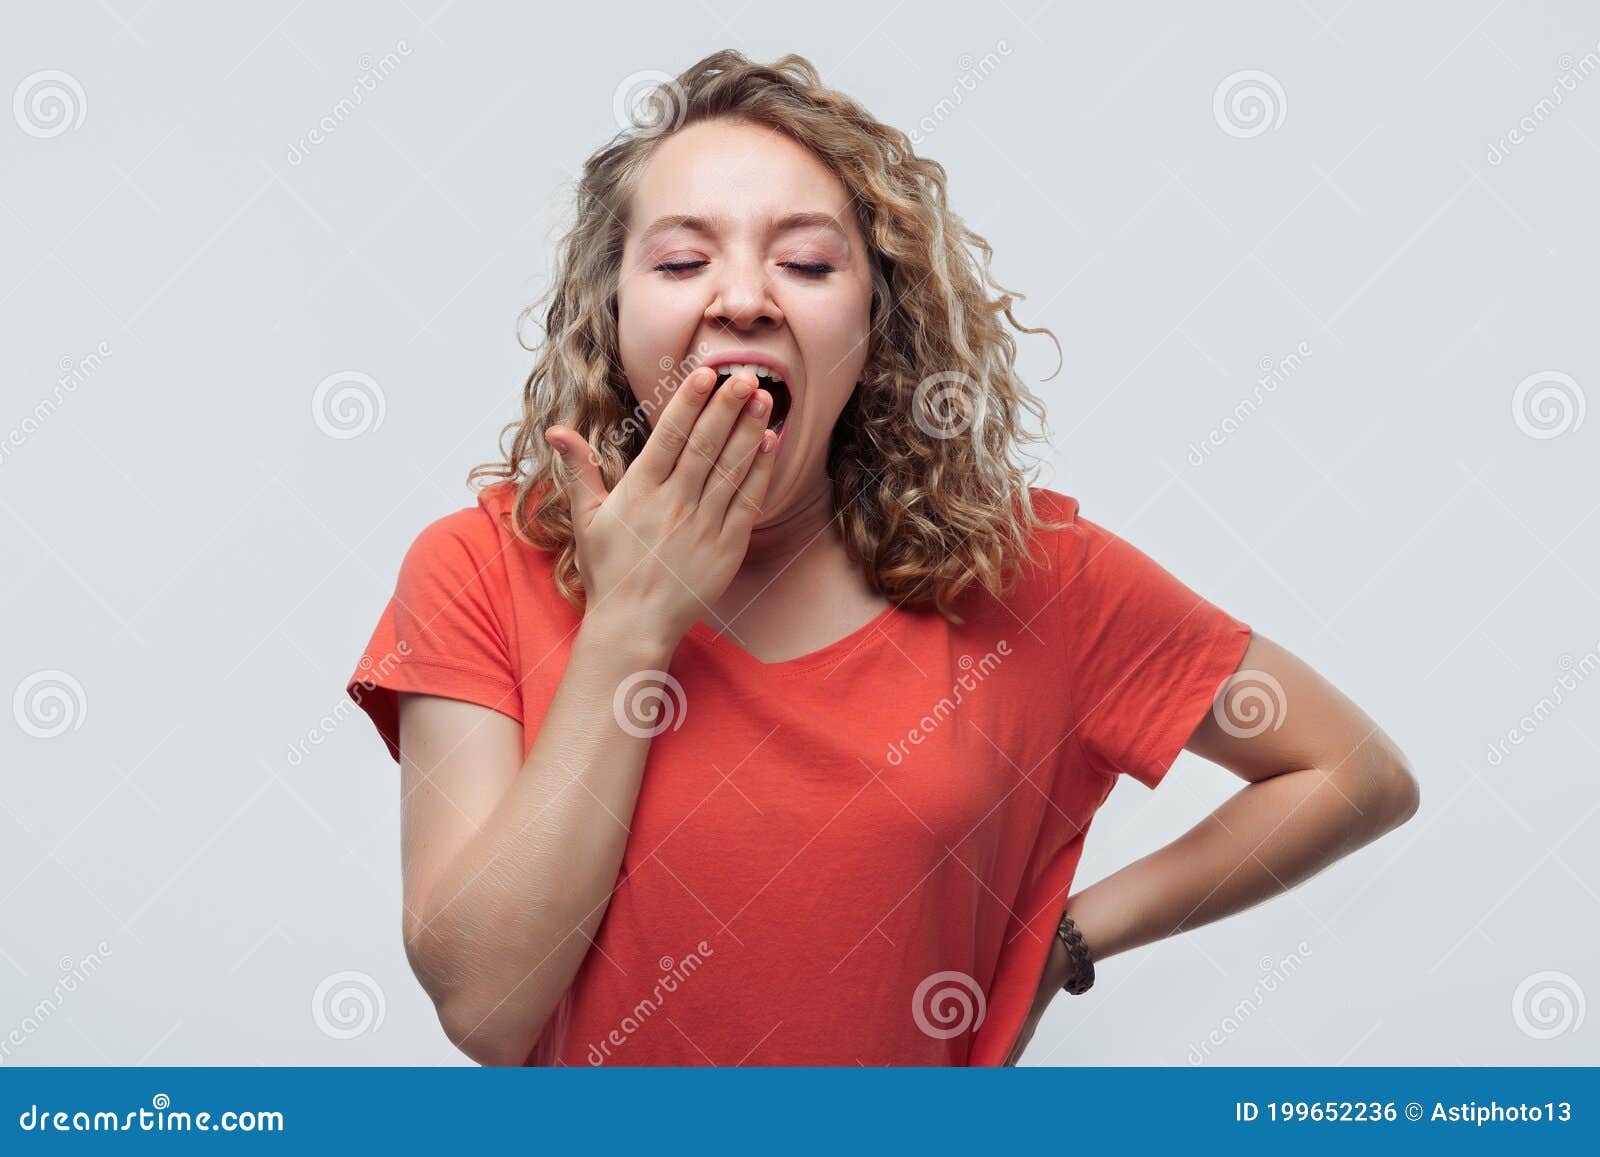 blonde girl bored and yawning tired covering mouth with hand. studio shot, white background. restless and sleepiness